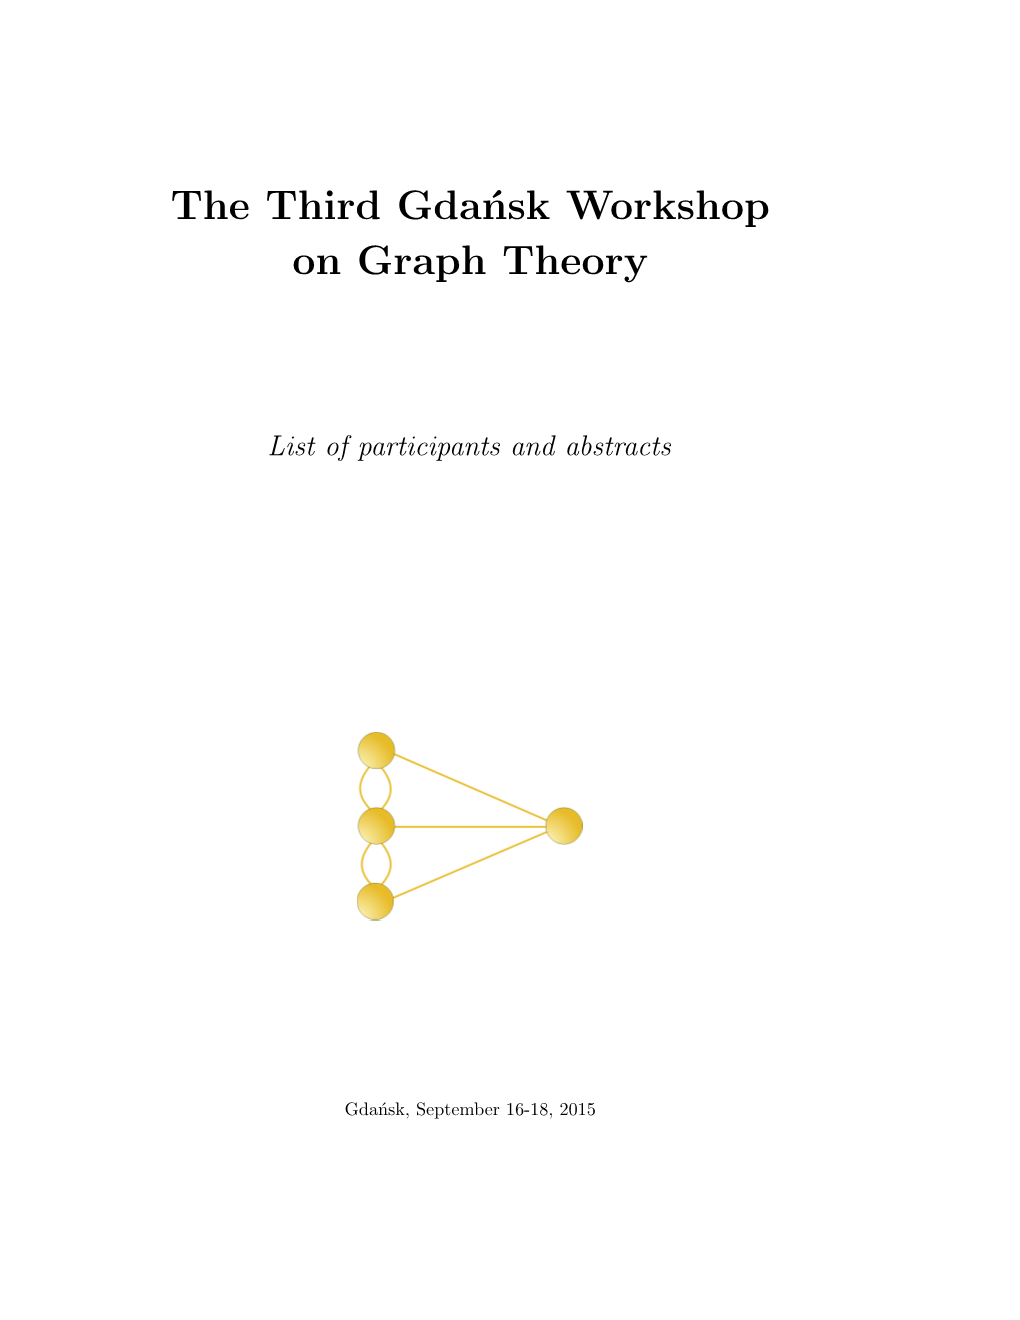 The Third Gdansk Workshop on Graph Theory